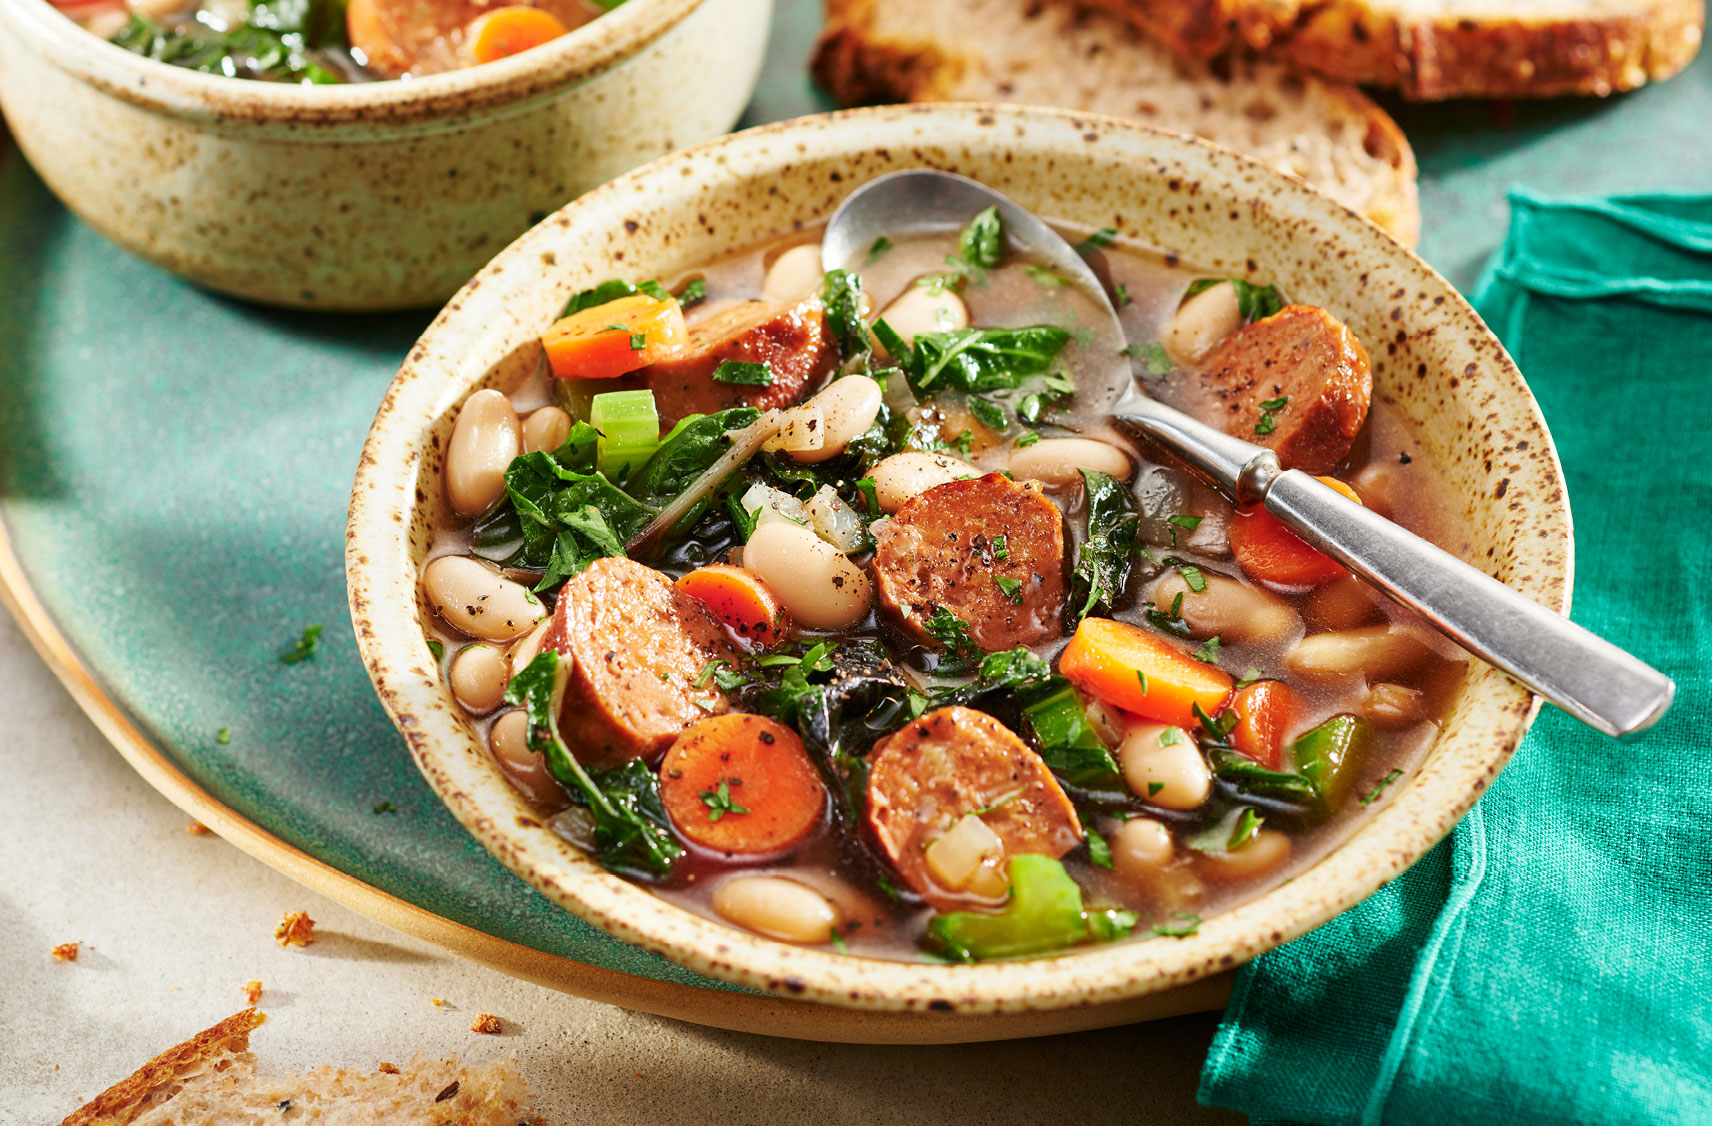 A bowl of Tuscan Soup with Plant-Based Italian Sausages and Plant-Based Beef-less Broth with Swiss chard, kidney beans and vegetables